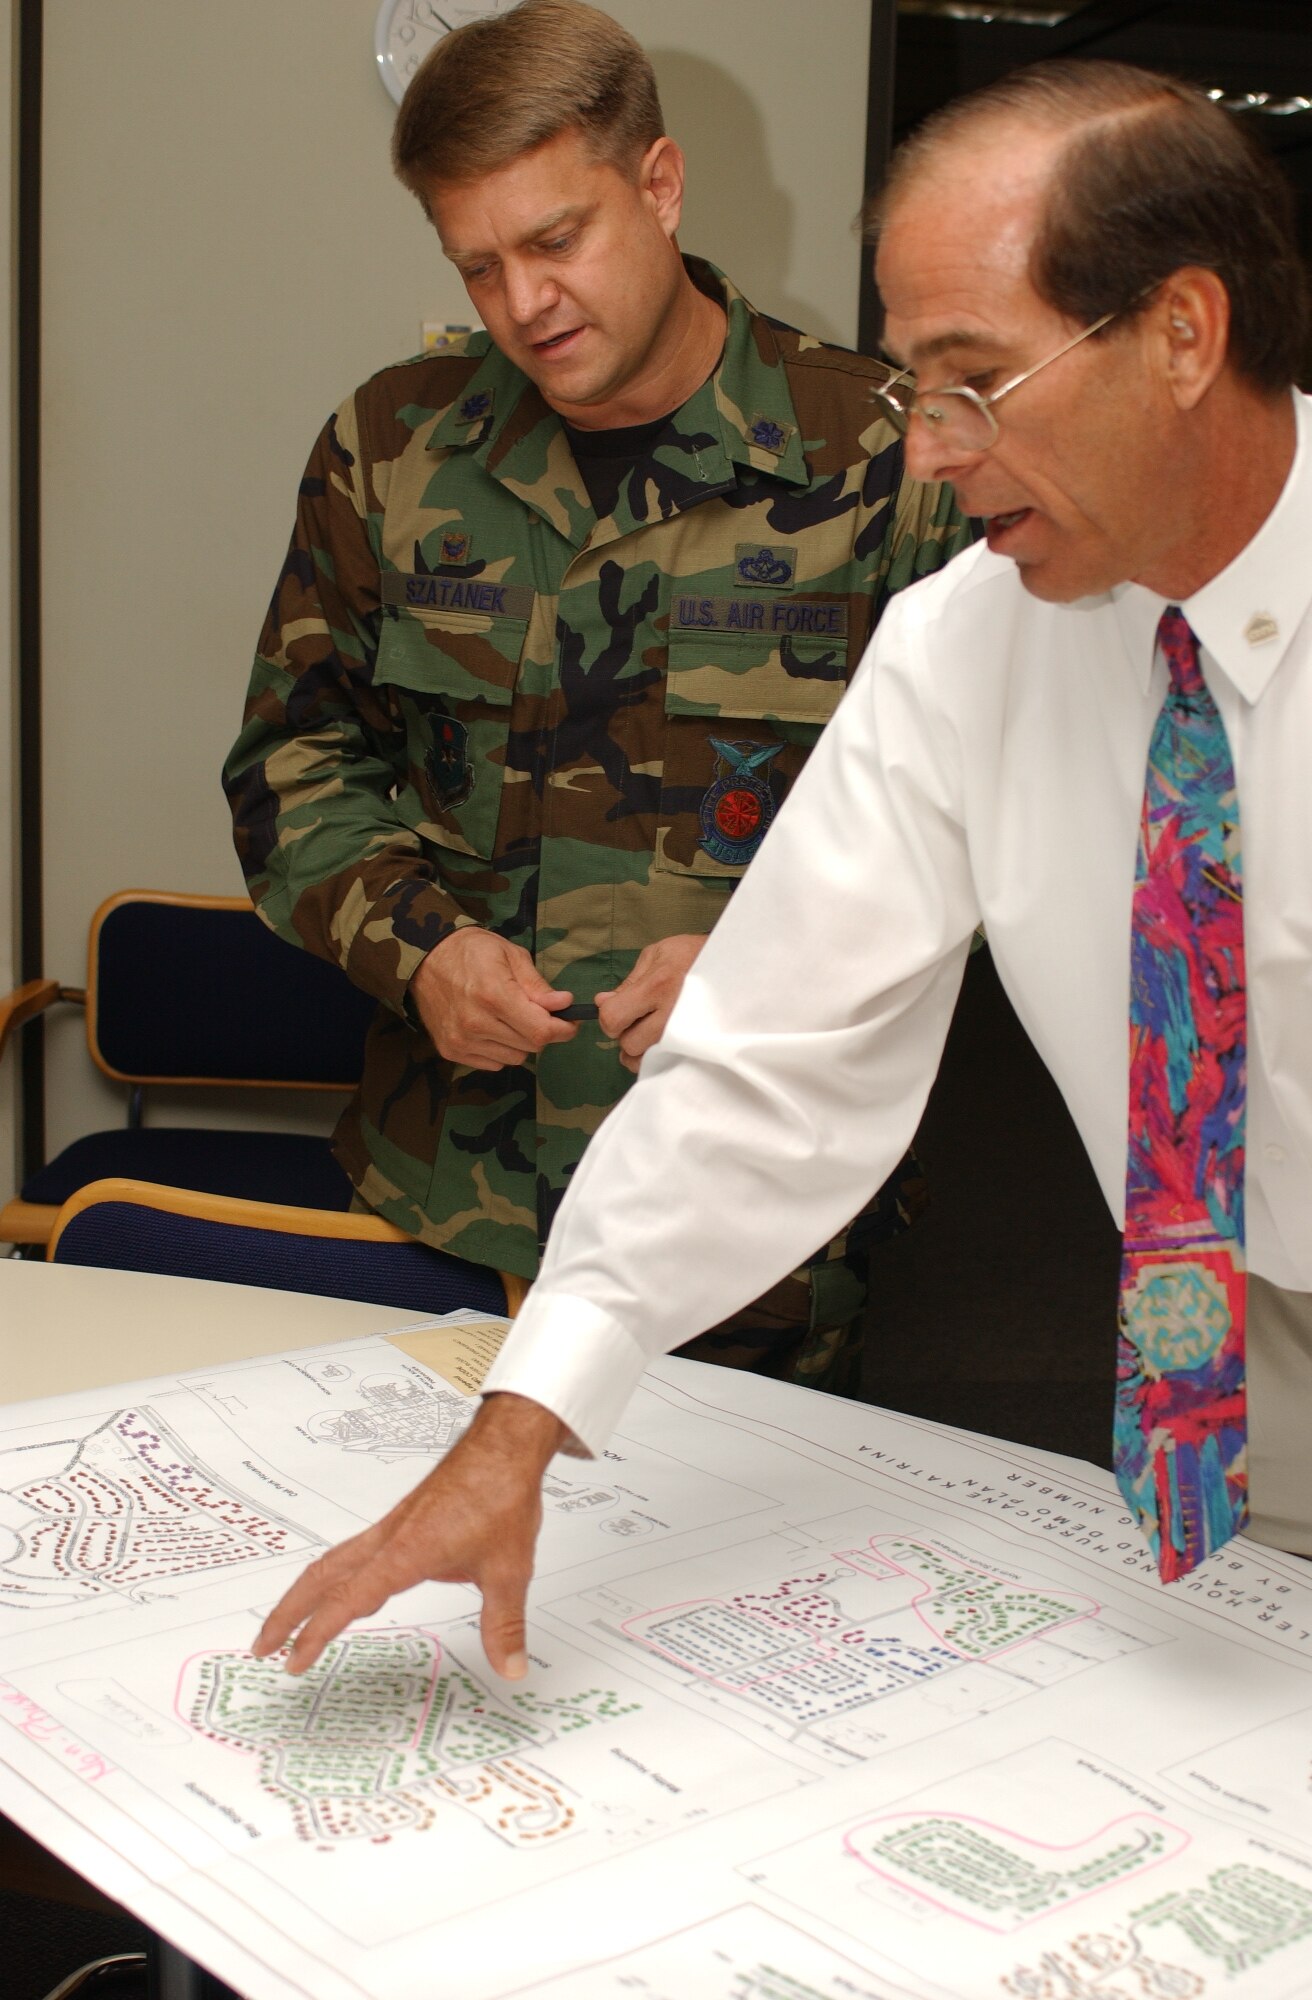 Lt. Col. Jeff Szatanek, left, new commander of the 81st Civil Engineer Squadon and Michael Reese, 81st CES housing flight chief, discuss plans for Keesler’s $287 million housing project.  Colonel Szatanek took command June 22.  (U. S. Air Force photo by Kemberly Groue)